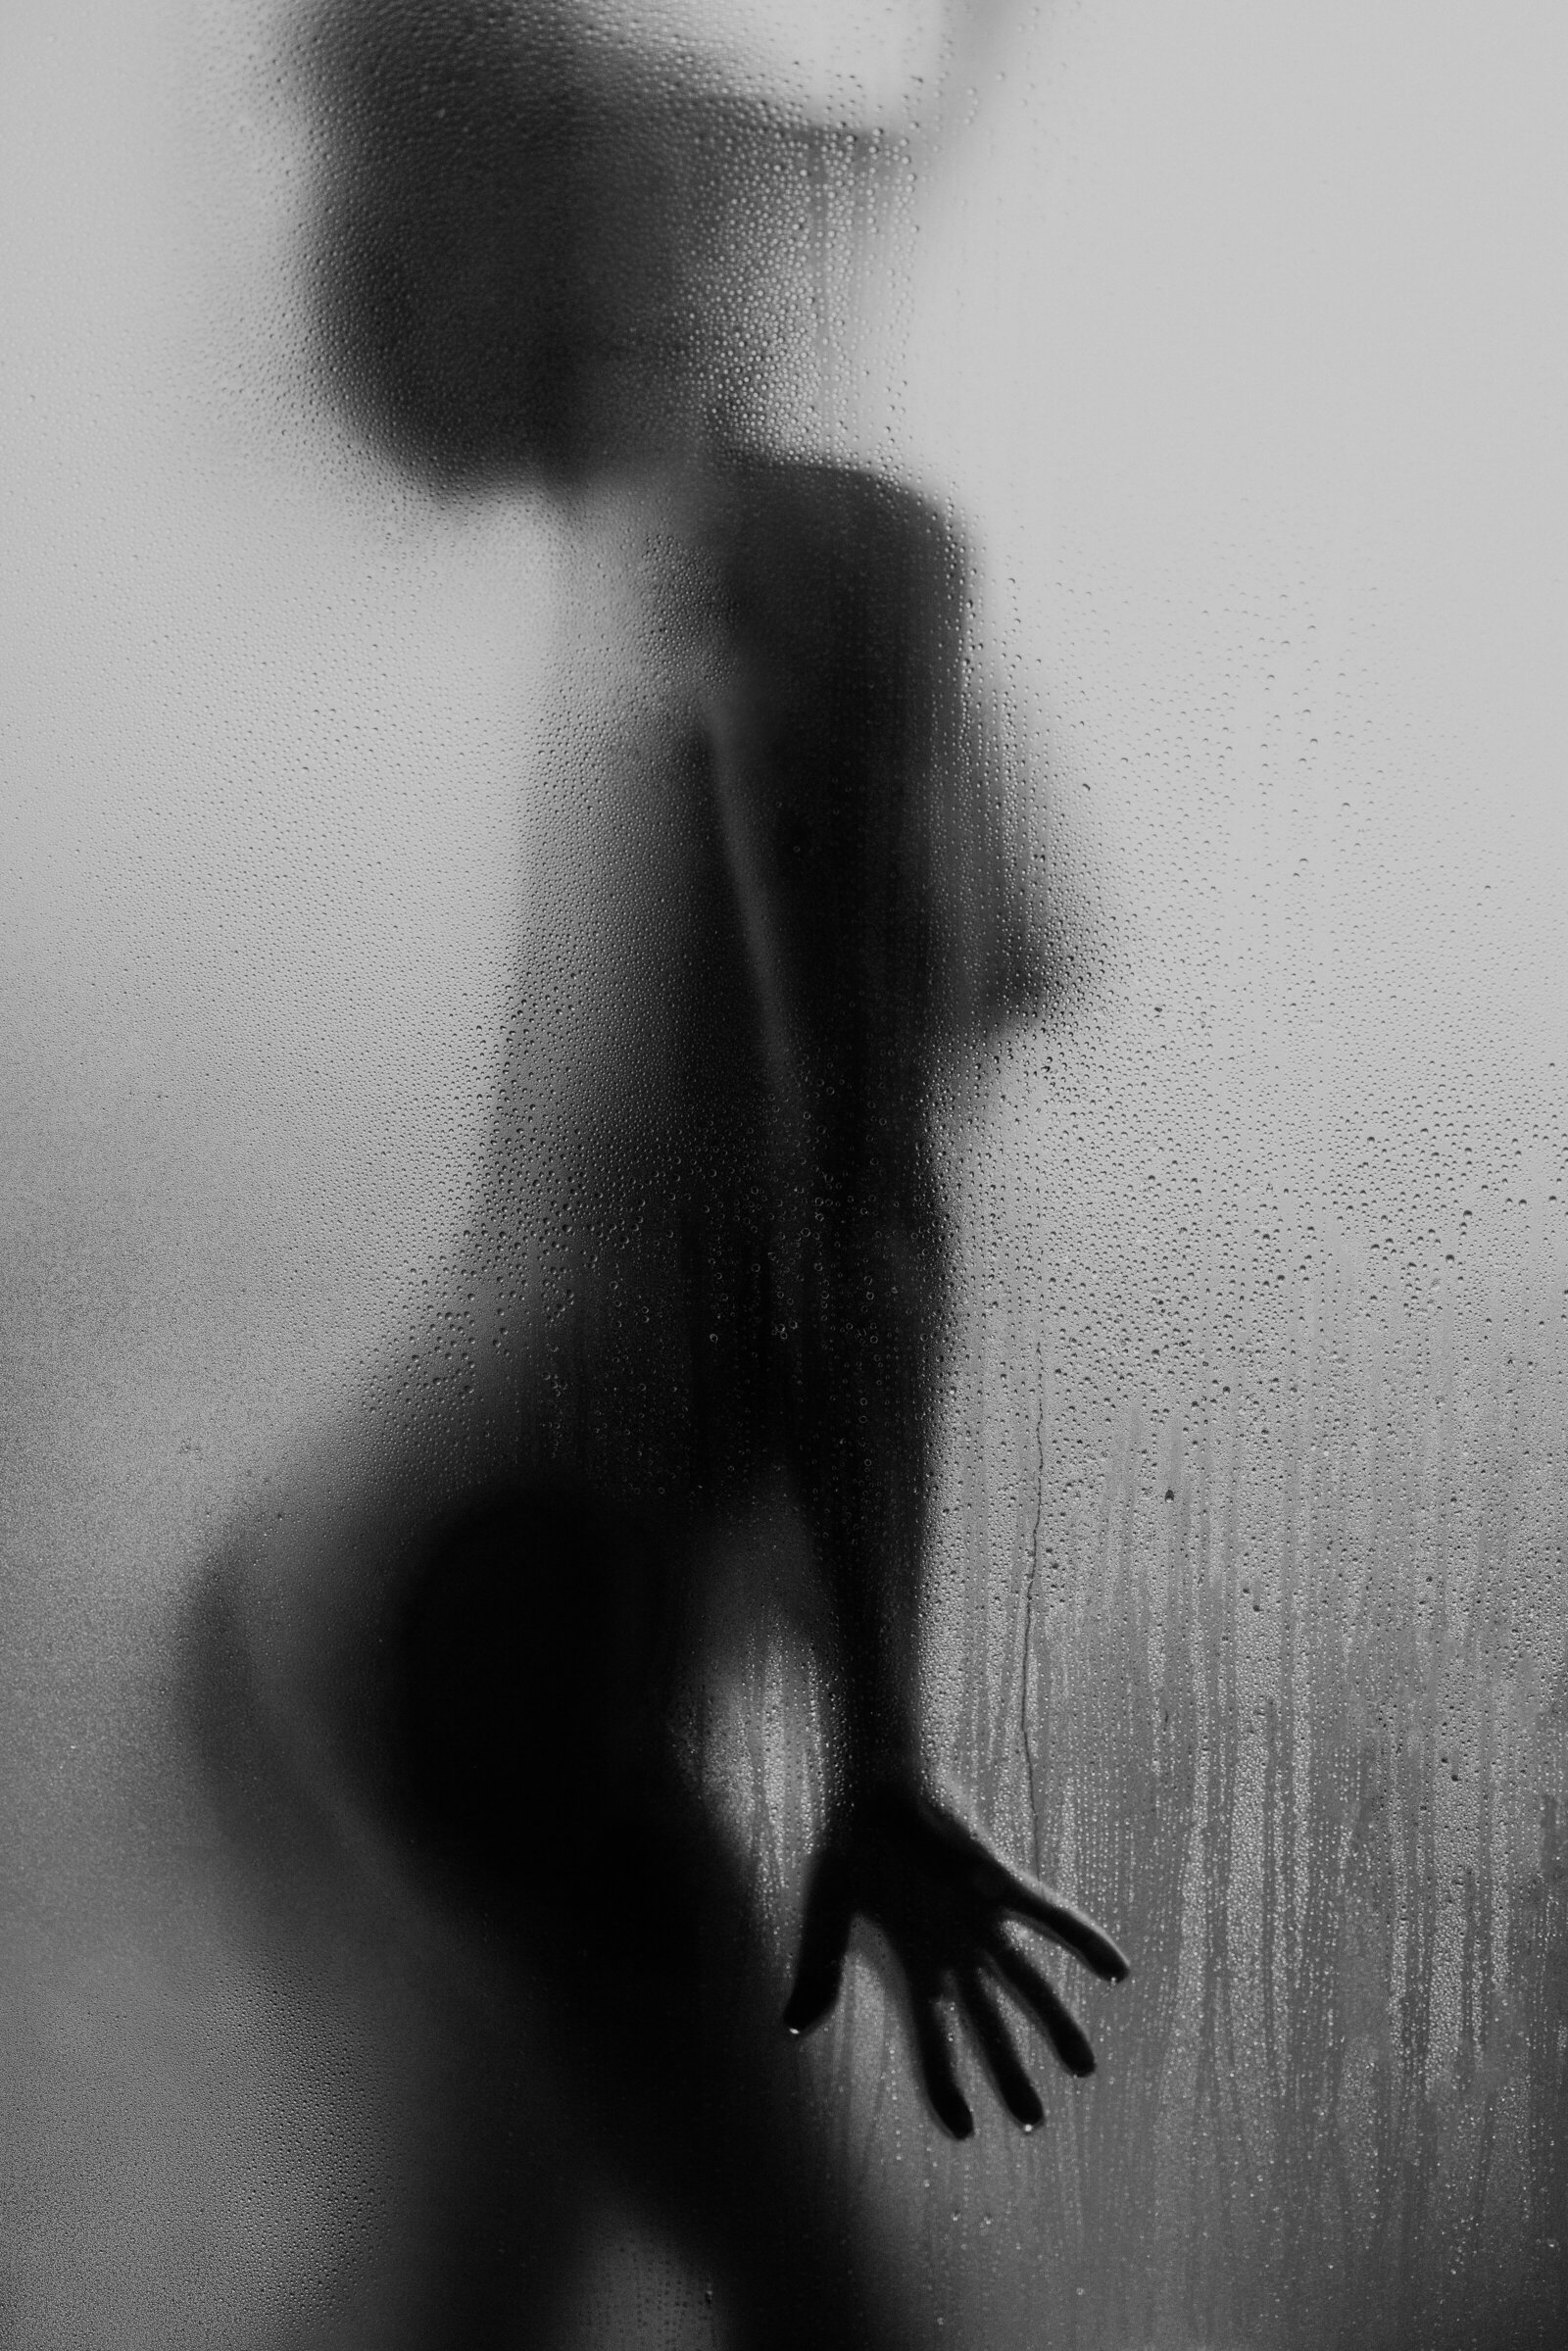 A woman's silhouette standing behind a steamy shower door